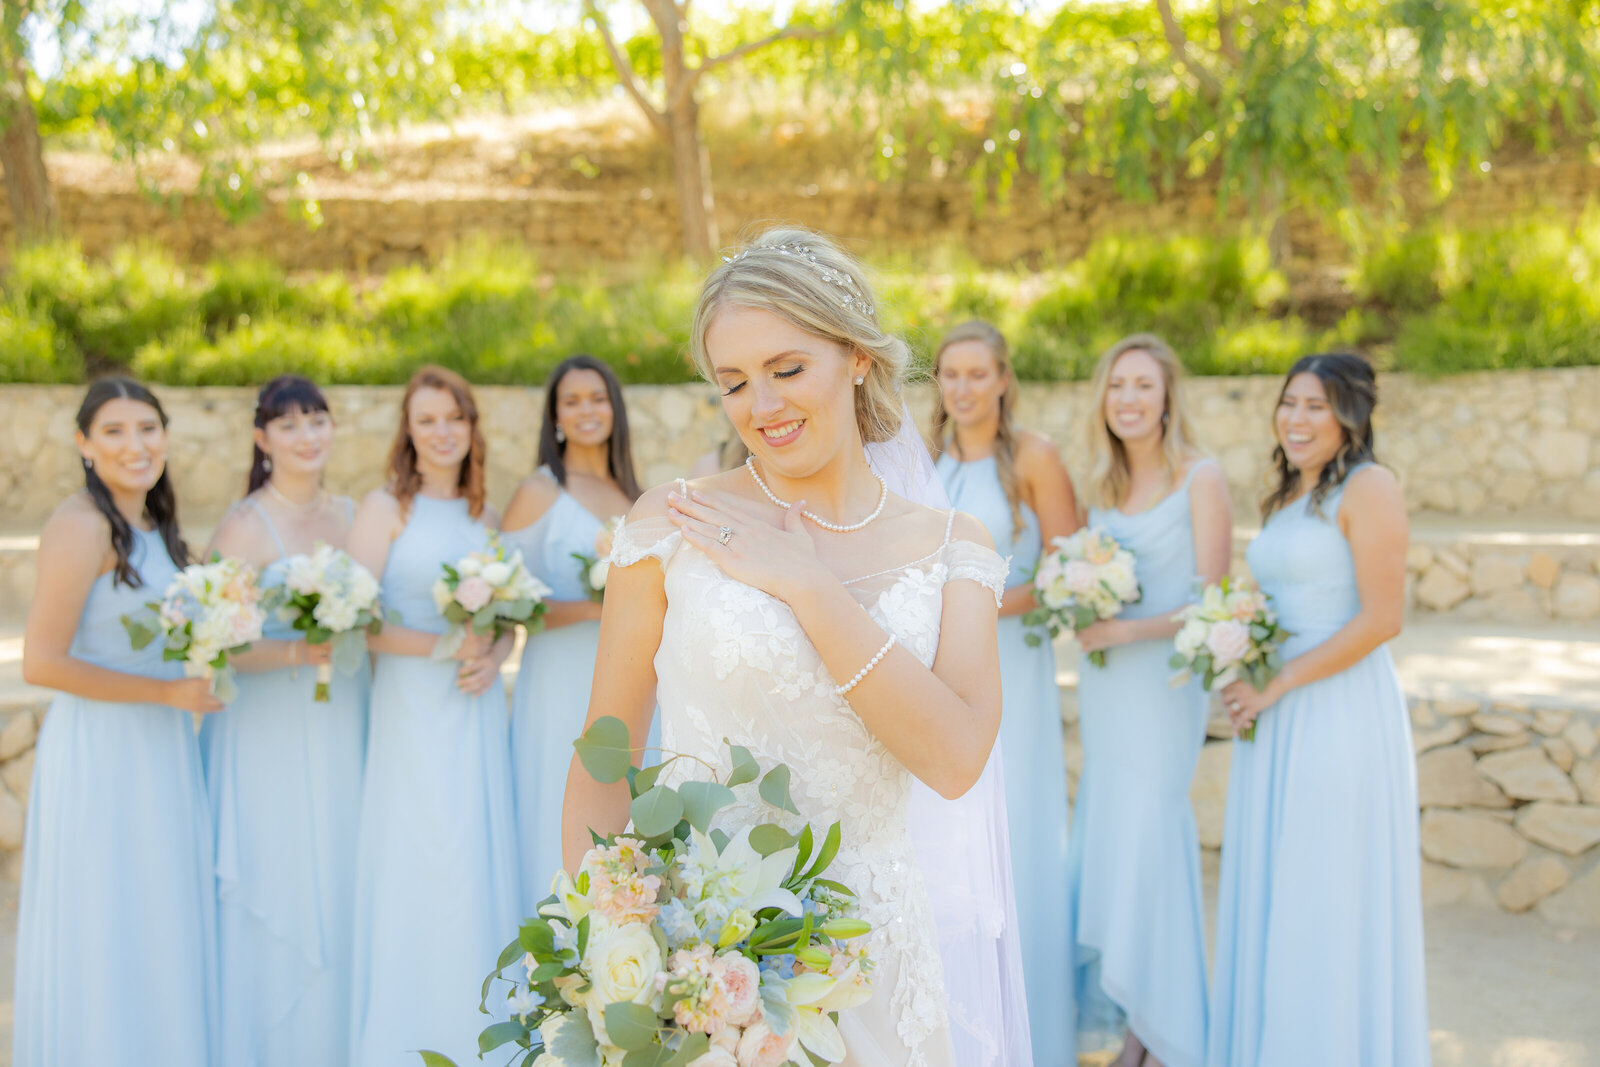 bride admires her ring with bridesmaids looking on at her in the background. photo by wedding photographer sacramento ca, philippe studio pro